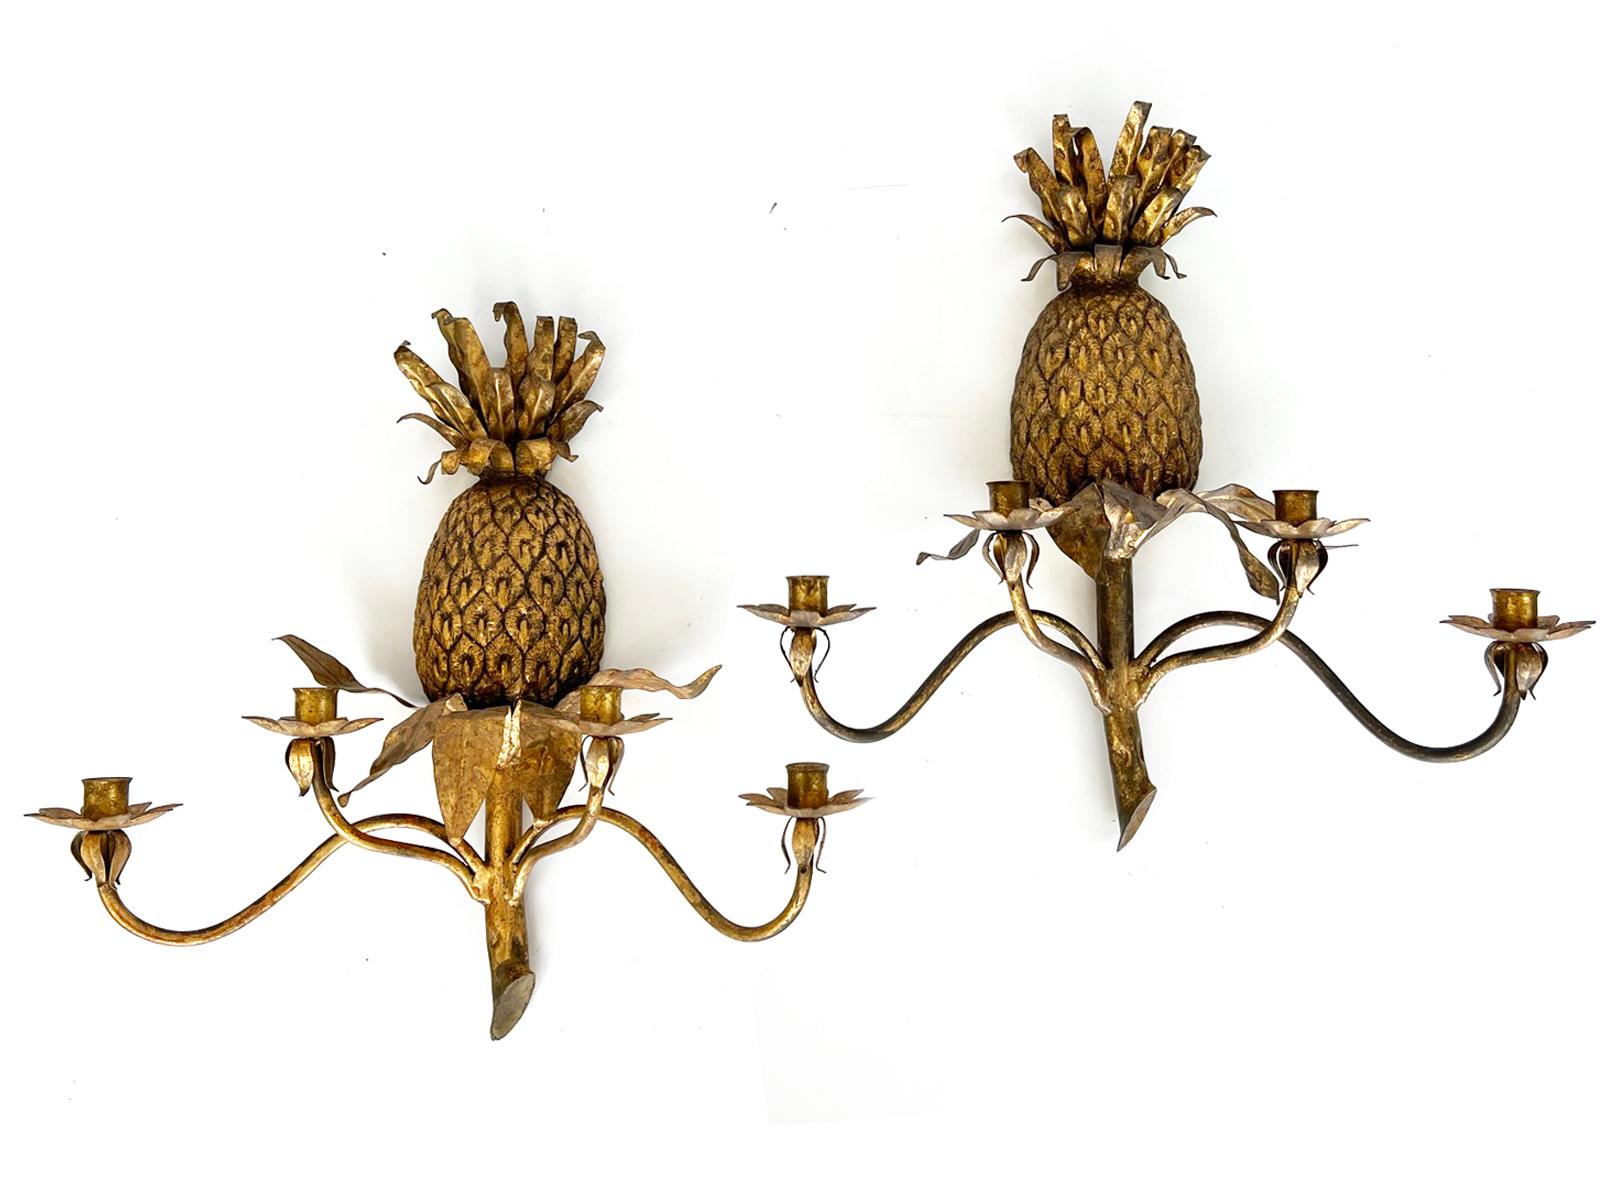 Pair of pineapple wall sconces, having a gilded finish. Each sconce has a well-articulated pineapple backplate of cast iron, surmounted with a leafy crown of tole. Four S-scroll candlearms are affixed to the stem, ending in foliate bobaches. Can be